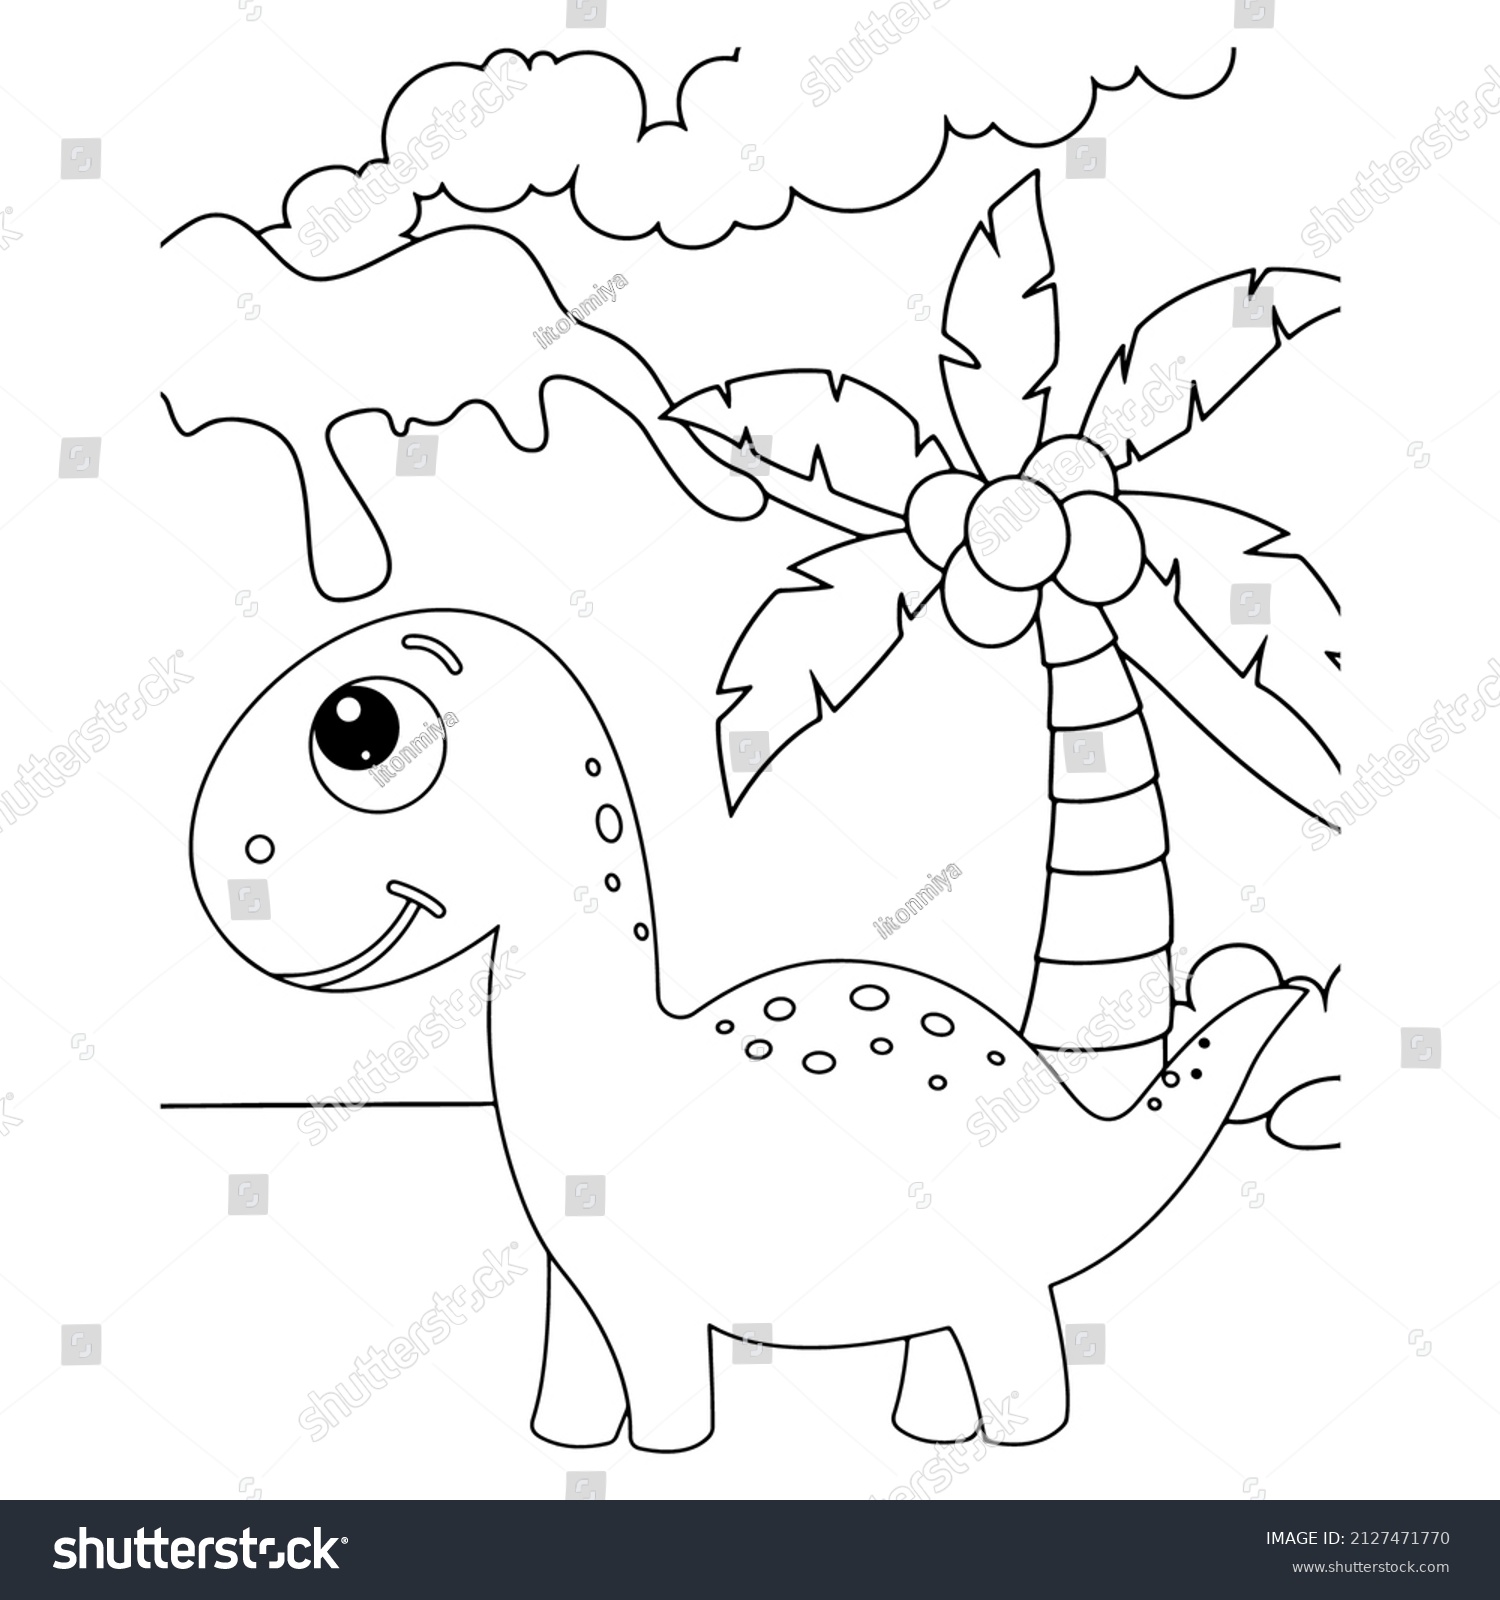 Dinosaur Coloring Pages Kids Stock Vector (Royalty Free) 2127471770